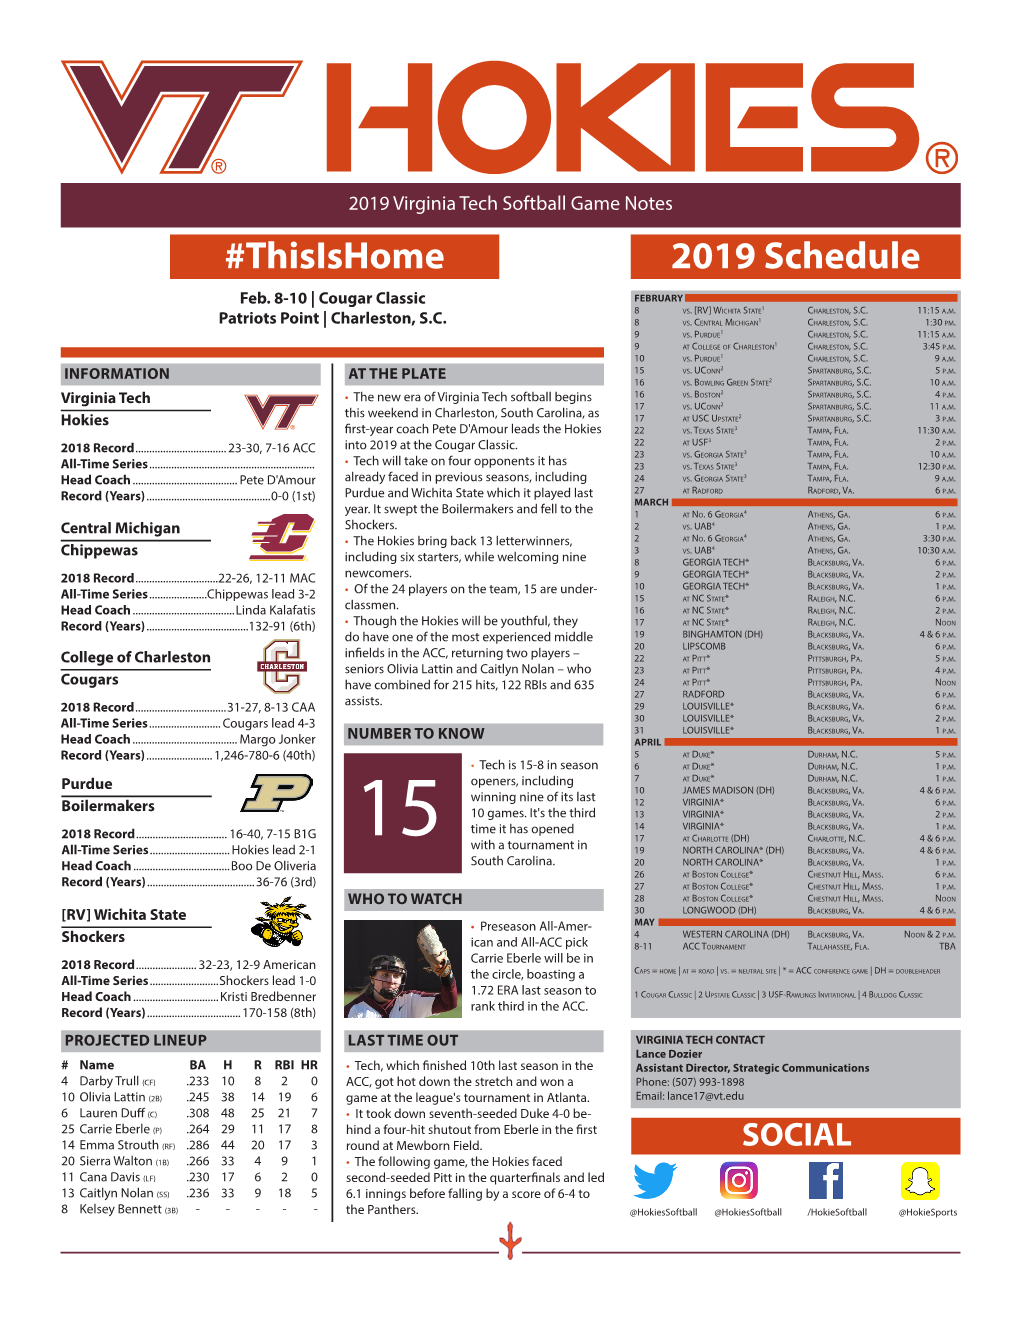 2019 Schedule #Thisishome